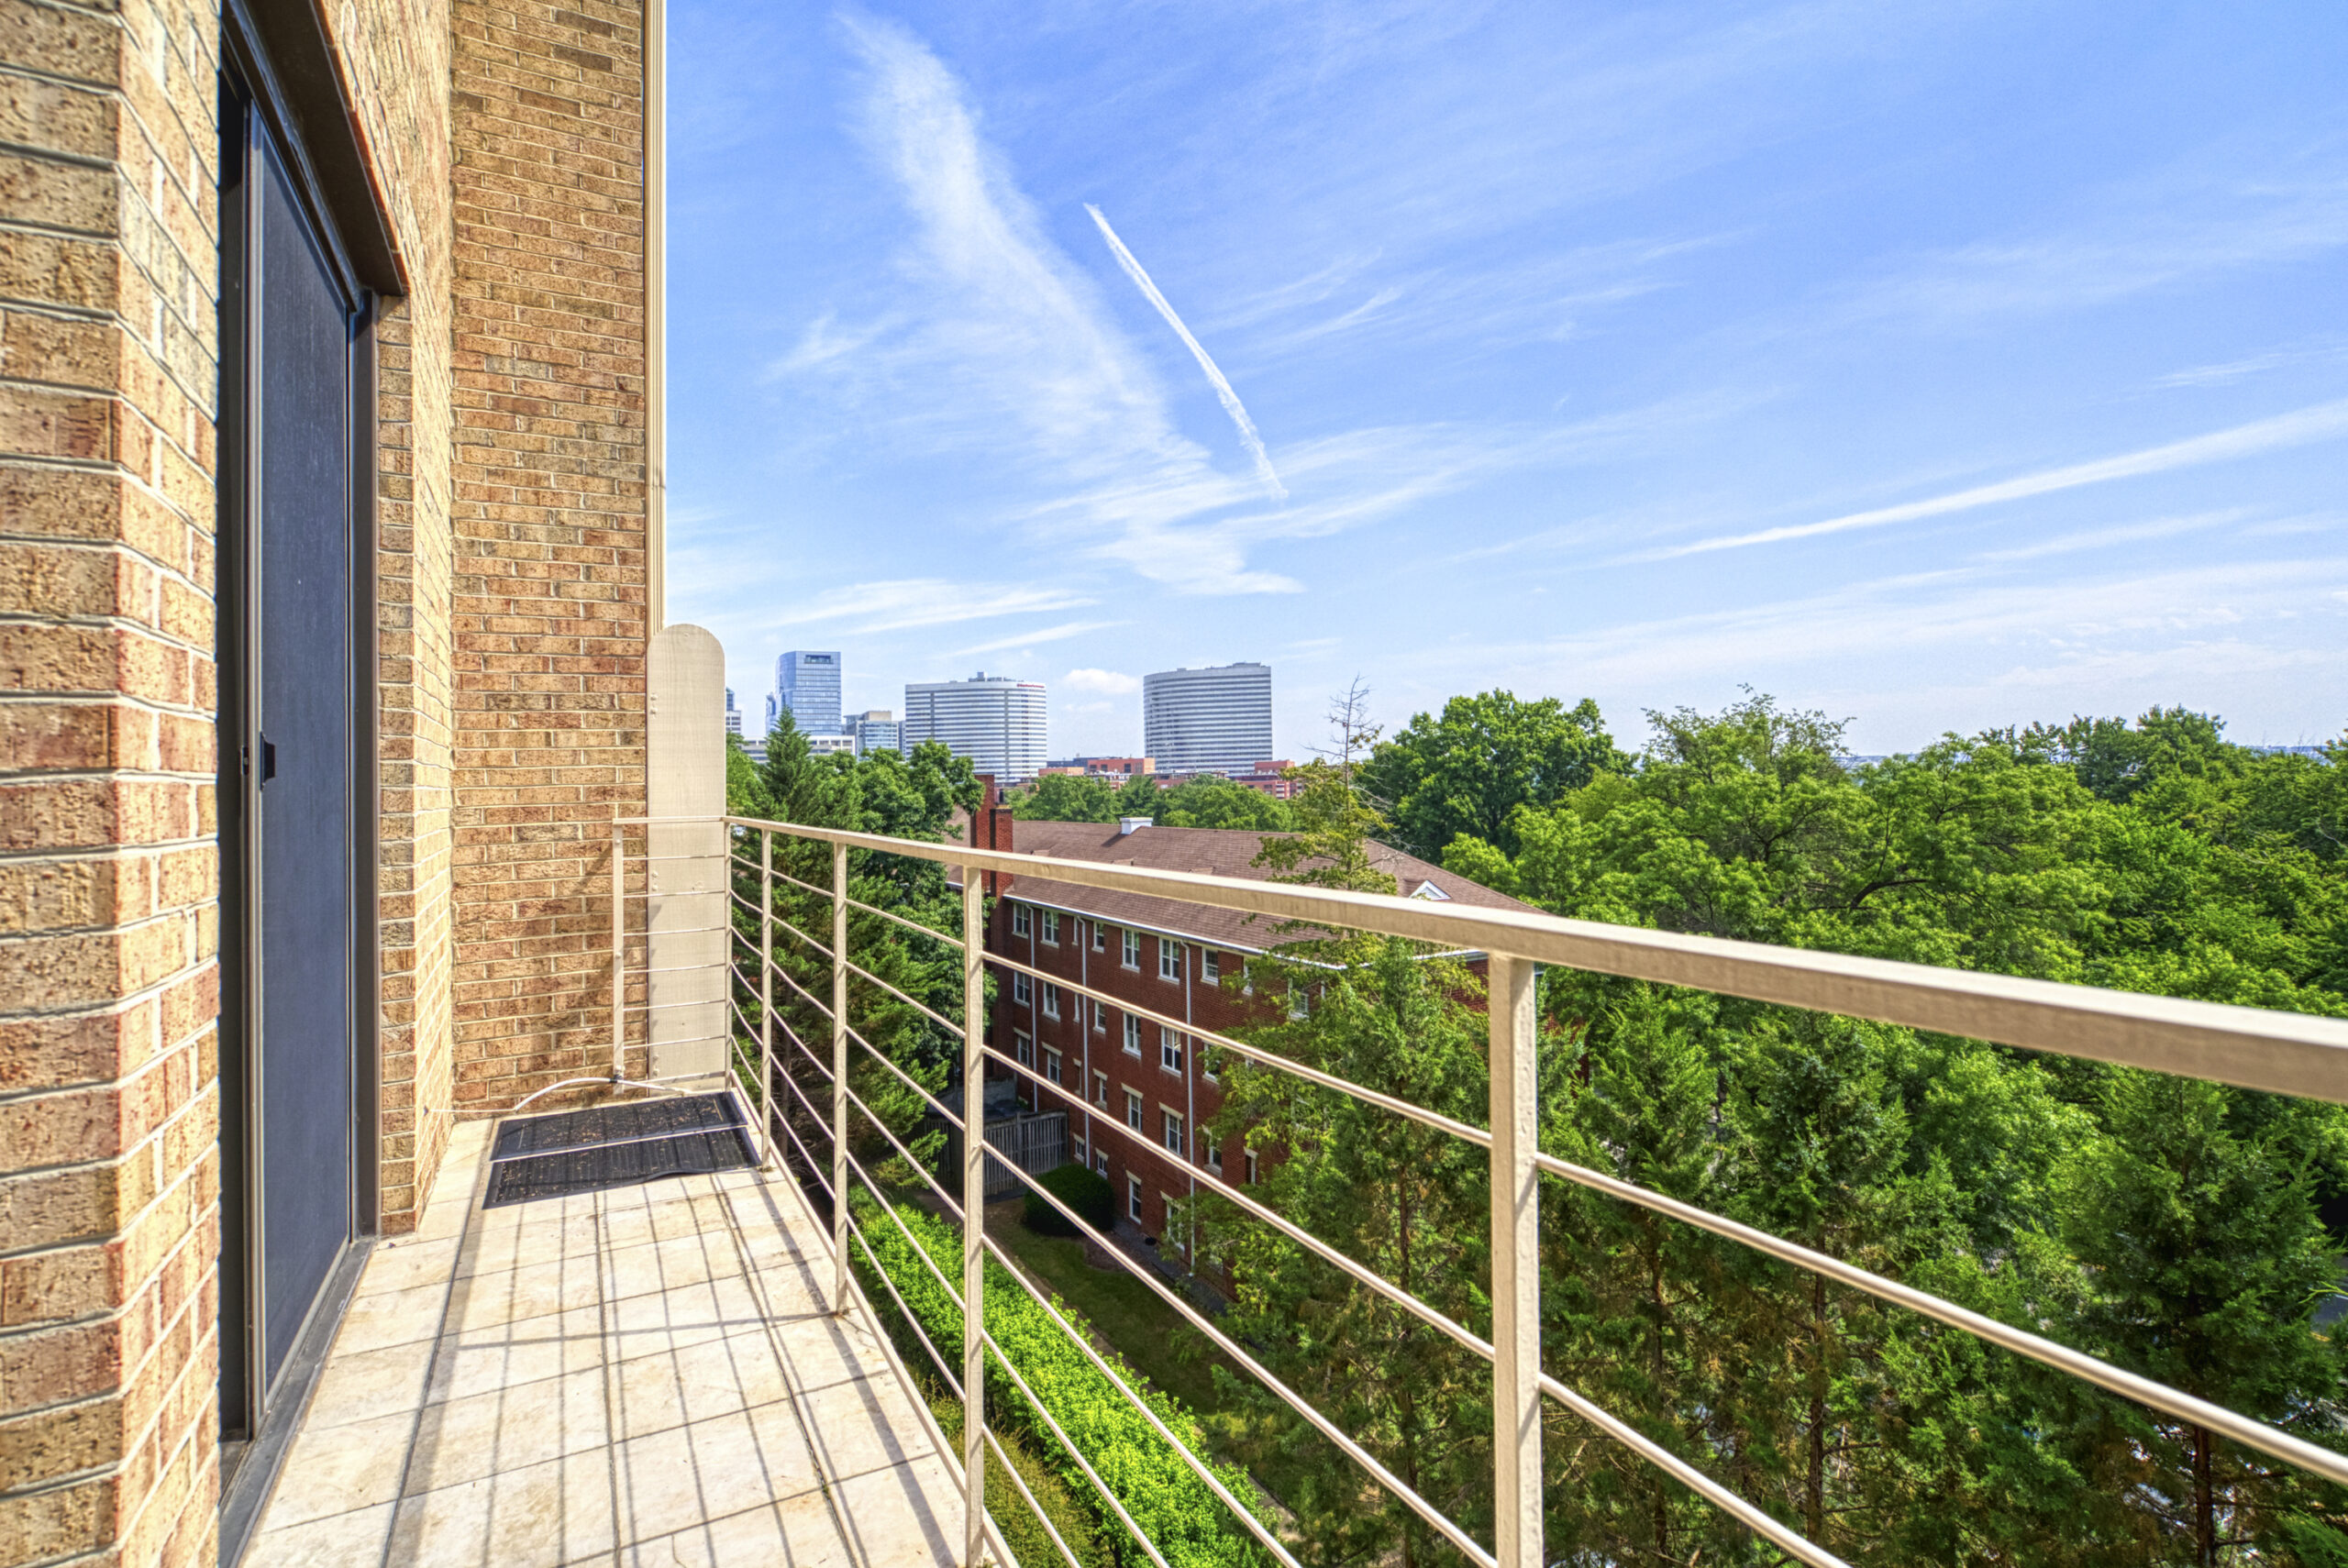 Professional exterior photo of 1215 N Nash St #1, Arlington - showing the rear view off of the living room balcony with trees in the foreground and the Washington DC Skyline in the background